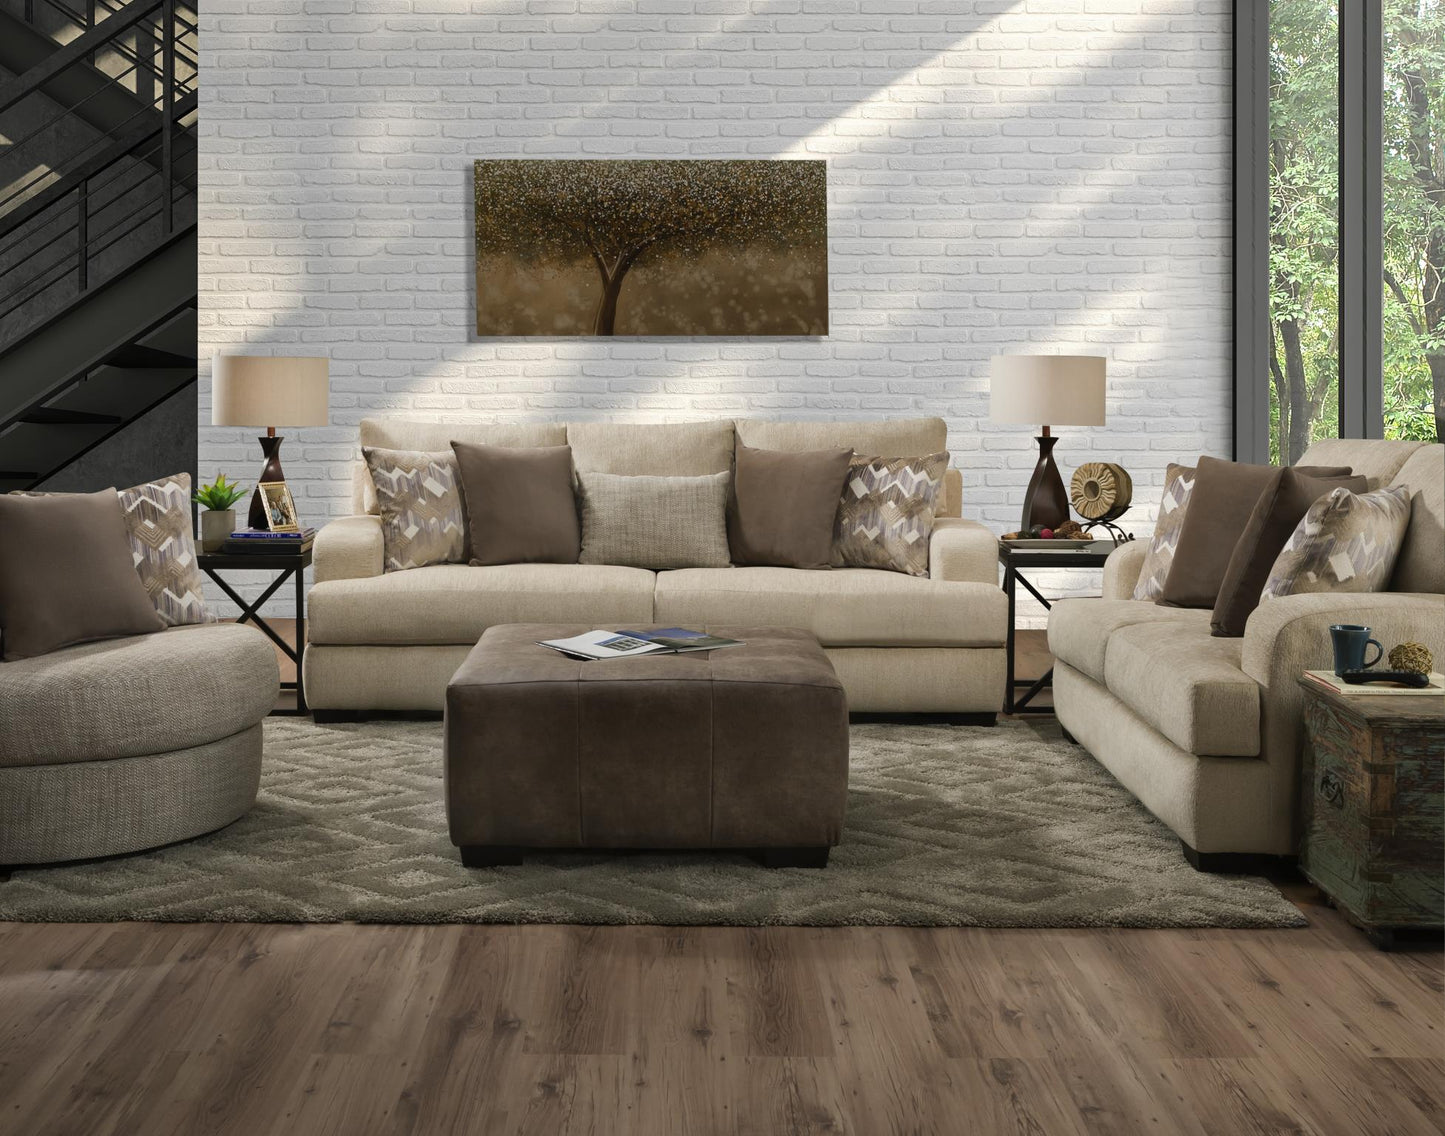 WEEKLY or MONTHLY. Rally Birch Tree Couch & Loveseat